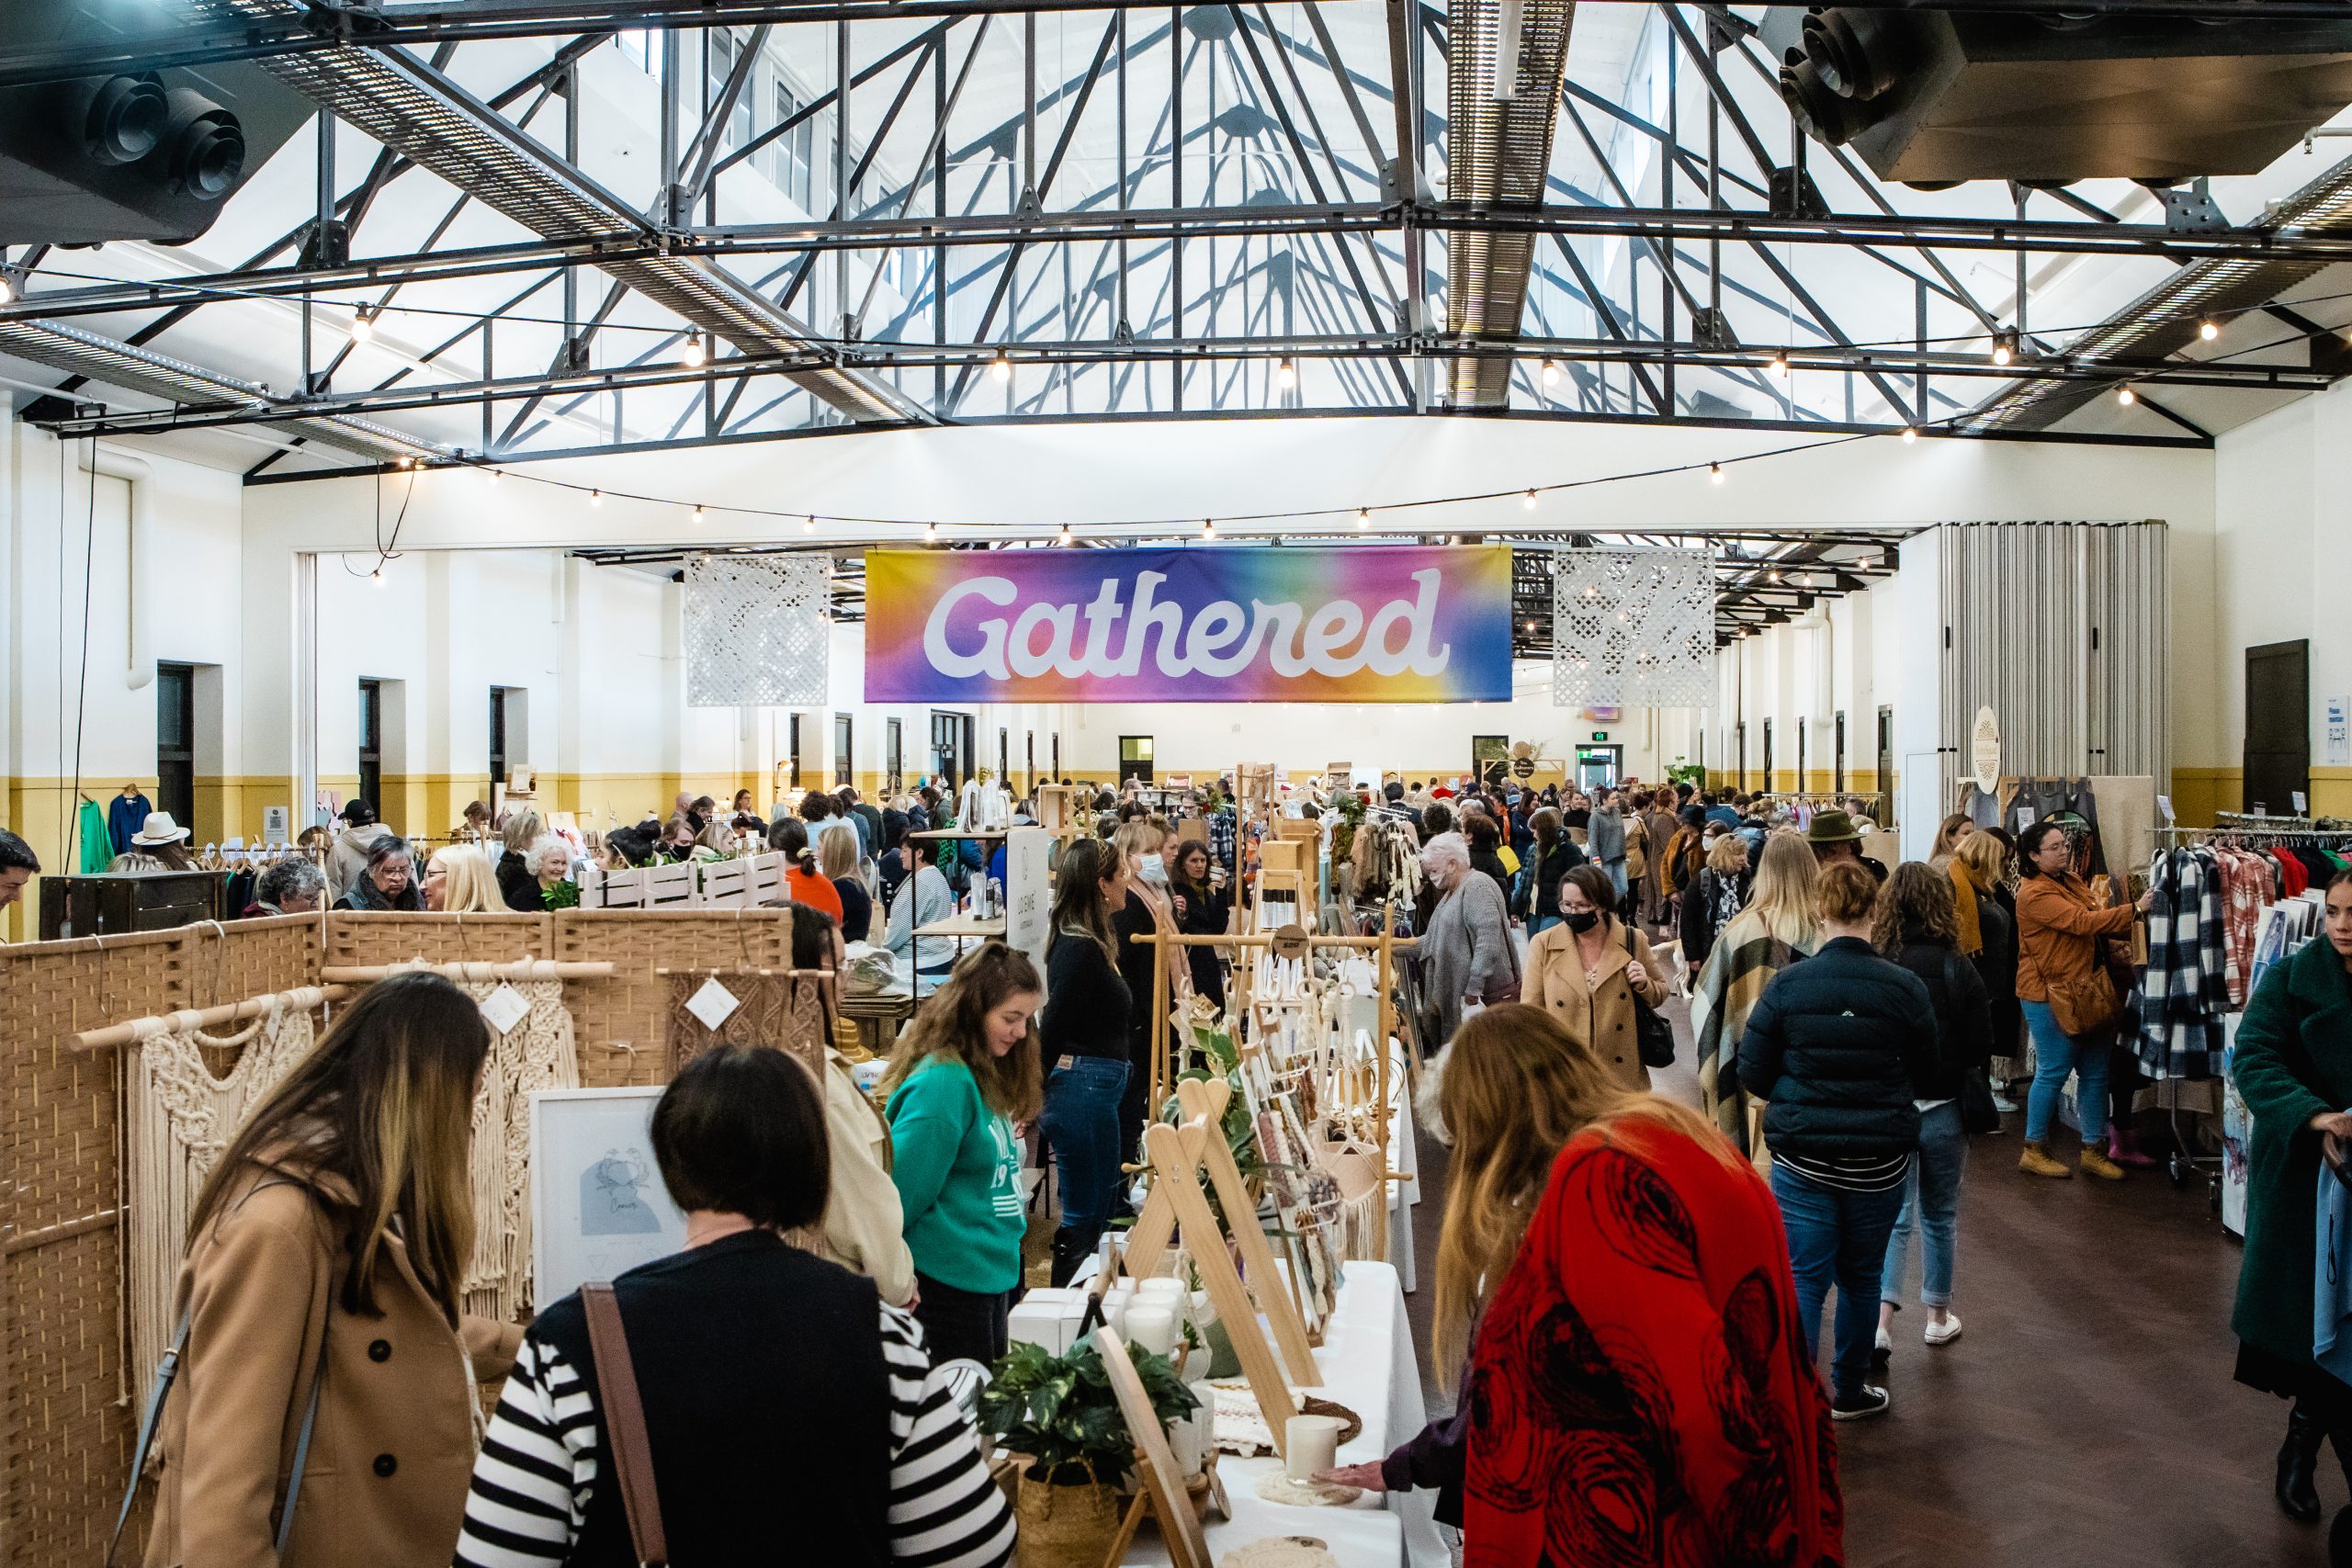 WIN $1,500 Worth Of Vouchers To Spend At The Gathered Spring Design Markets!